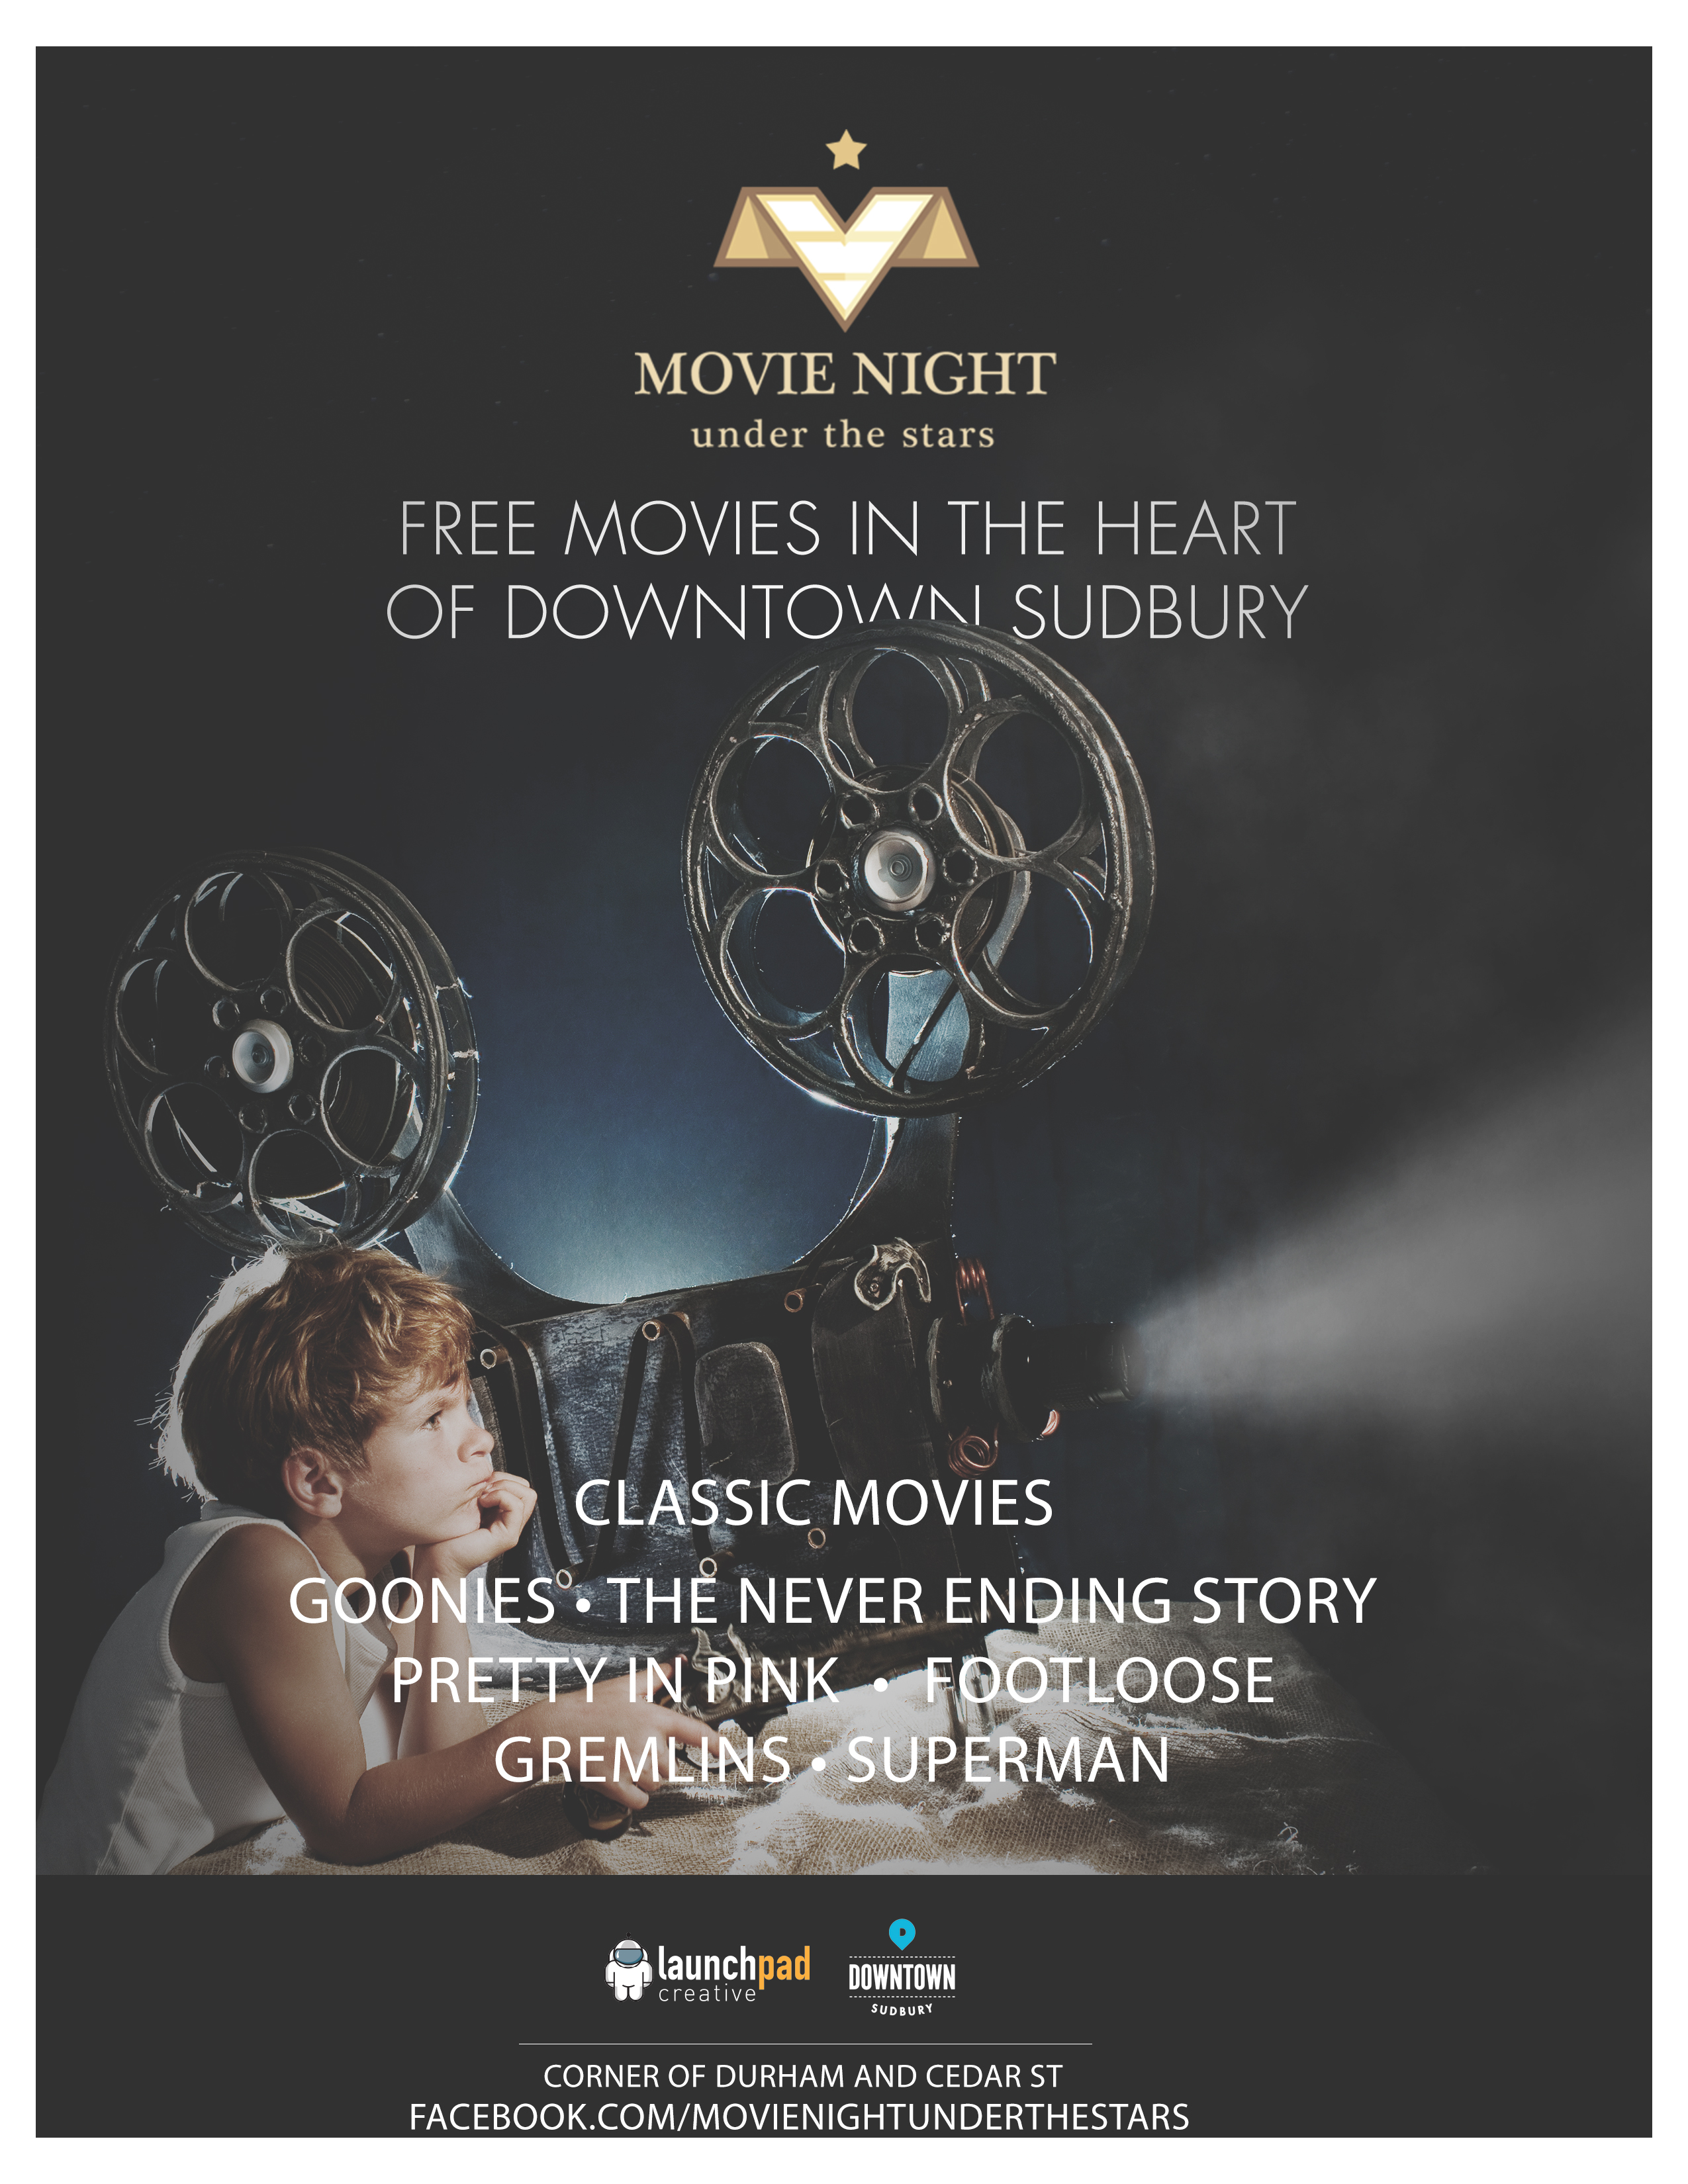 Movie Night Under the Stars is back for their 2016 season!